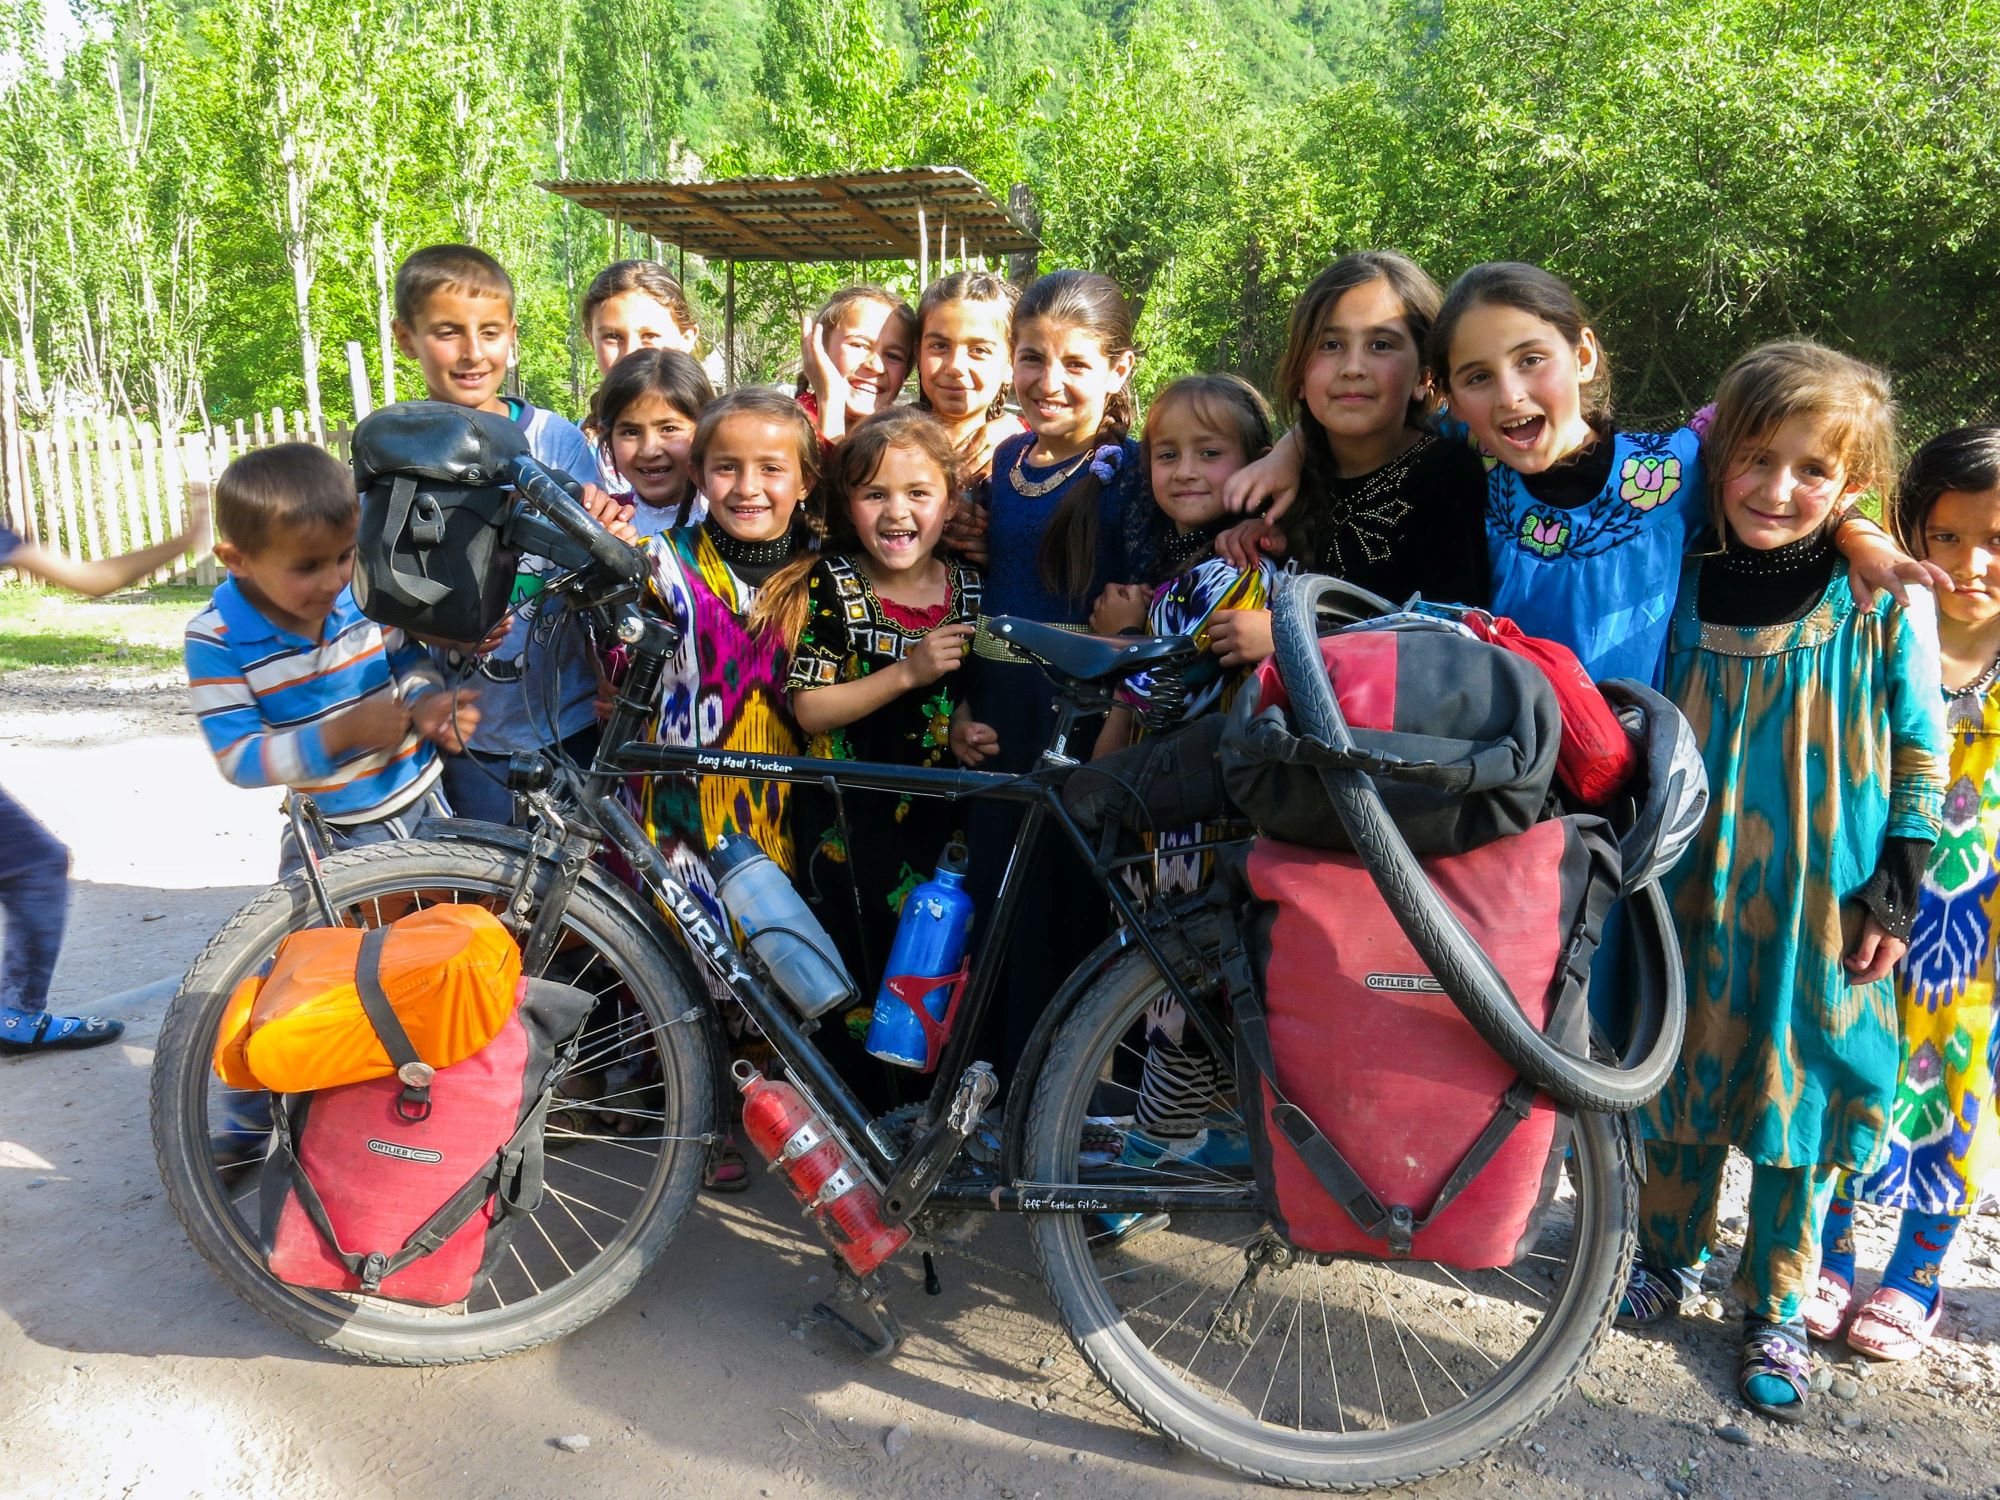 50 ways to cycle the world: children with touring bike